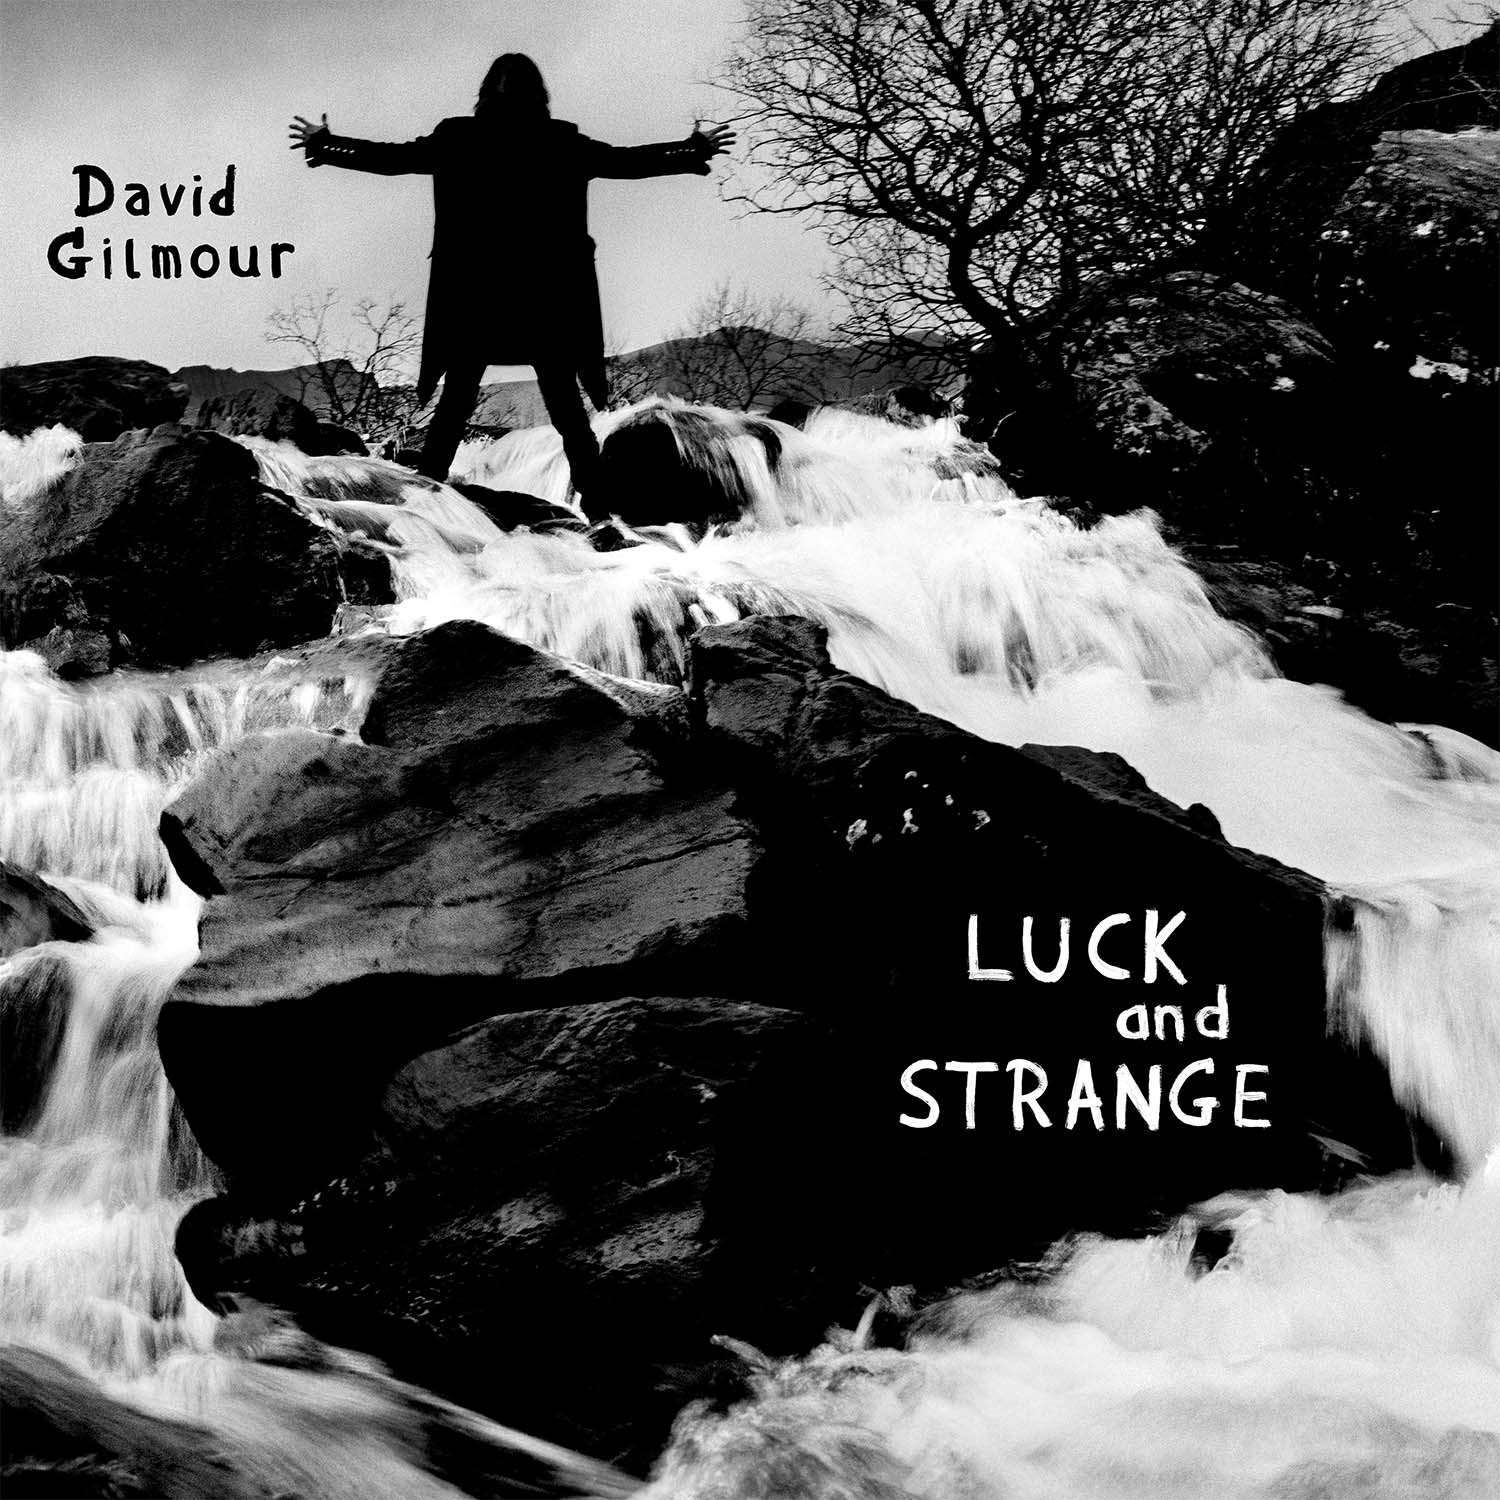 DAVID GILMOUR ‘LUCK AND STRANGE’ THE FIRST NEW ALBUM IN NINE YEARS RELEASED 6th SEPTEMBER ON SONY MUSIC